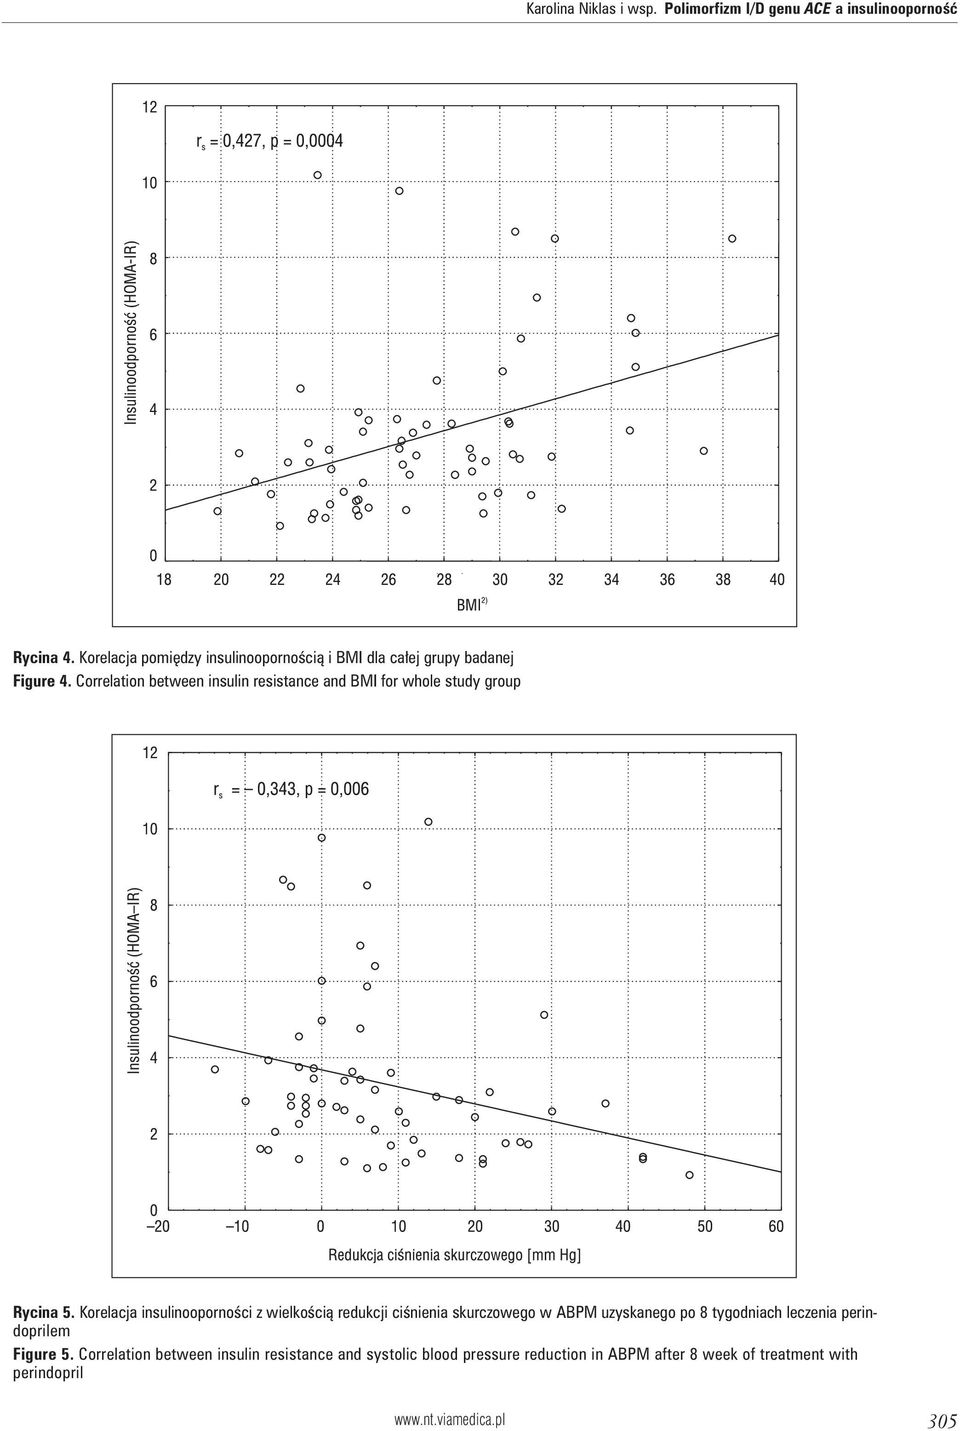 Correlation between insulin resistance and BMI for whole study group Rycina 5.